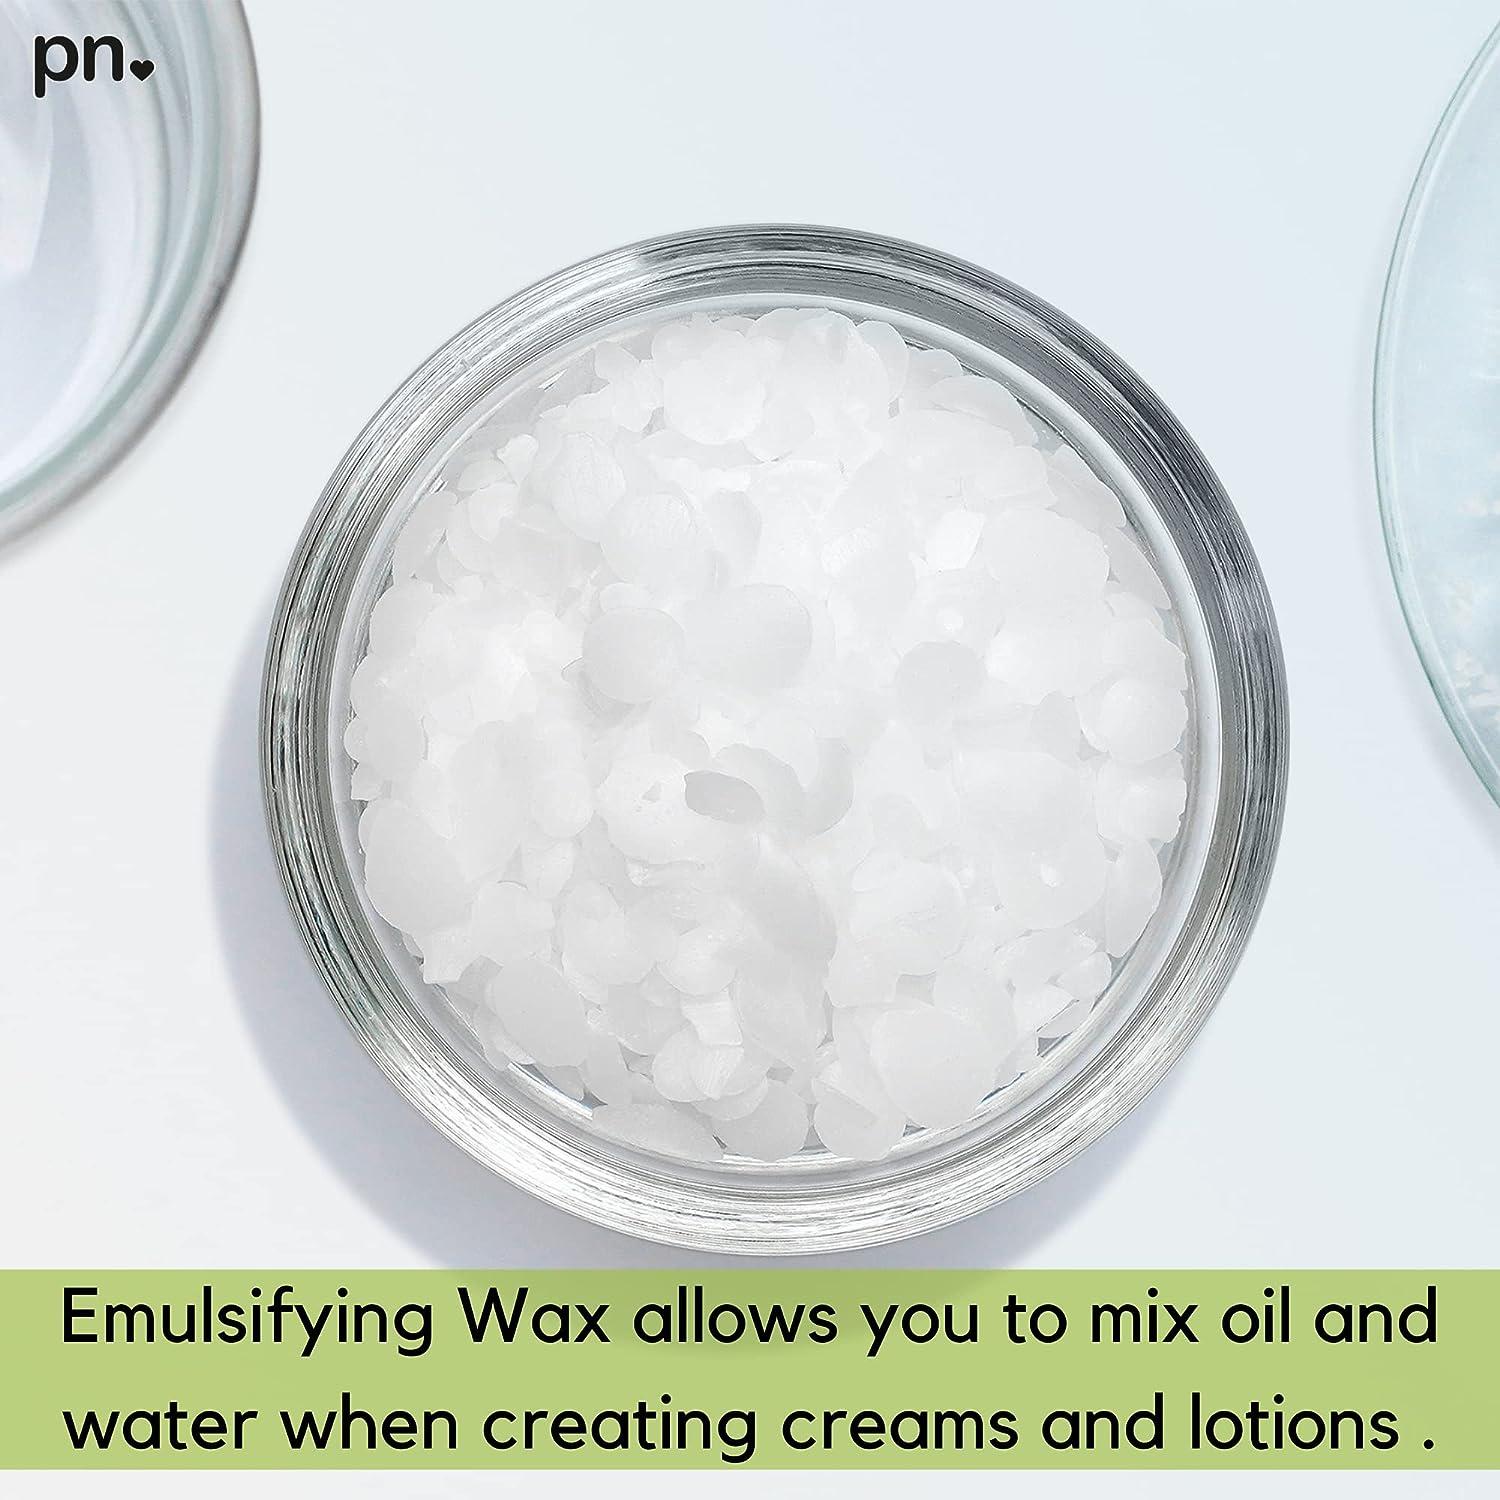 Non-GMO Emulsifying Wax NF Pastilles - 16oz., 100% Natural Plant Derived